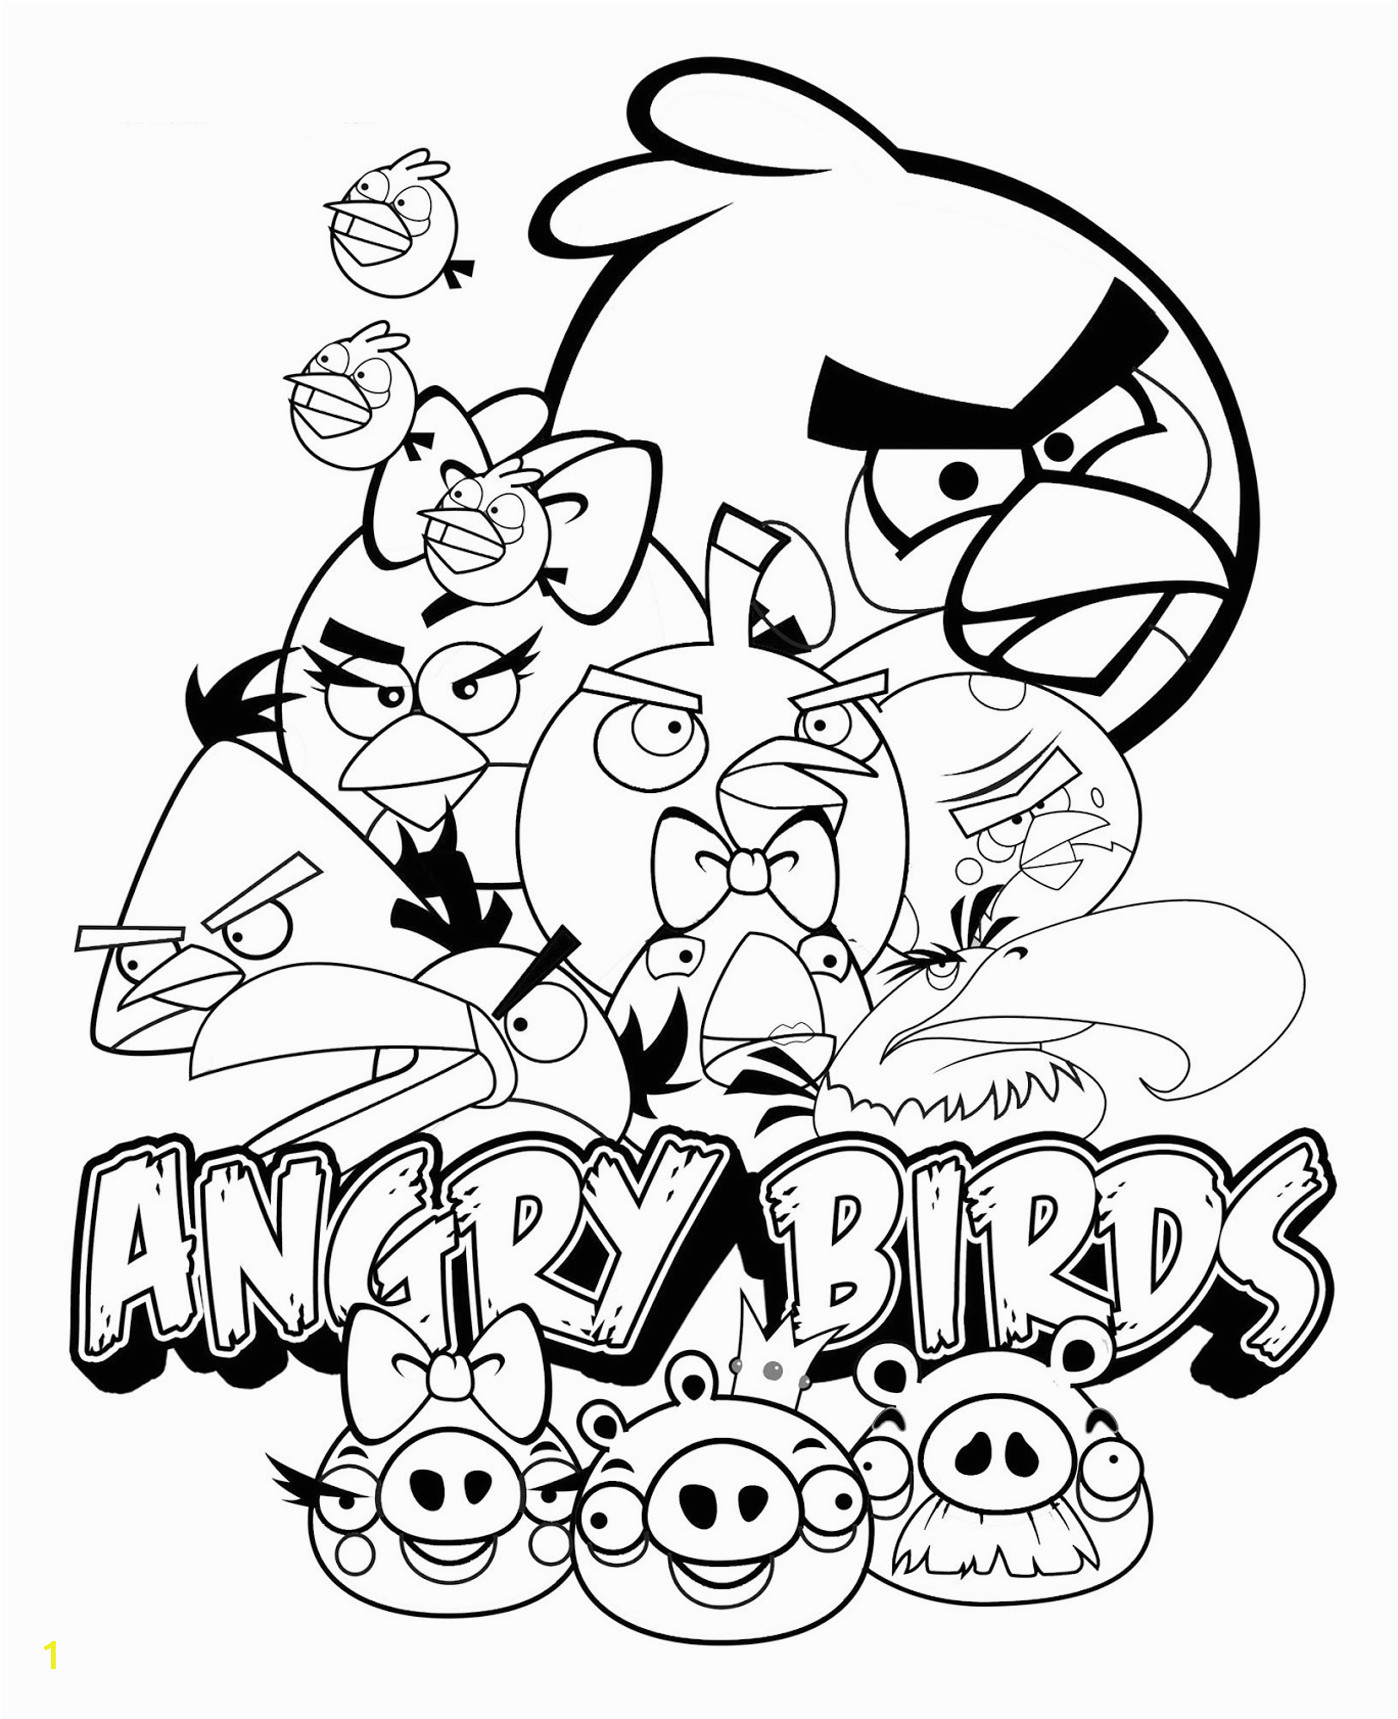 image=angry birds Coloring for kids angry birds 1